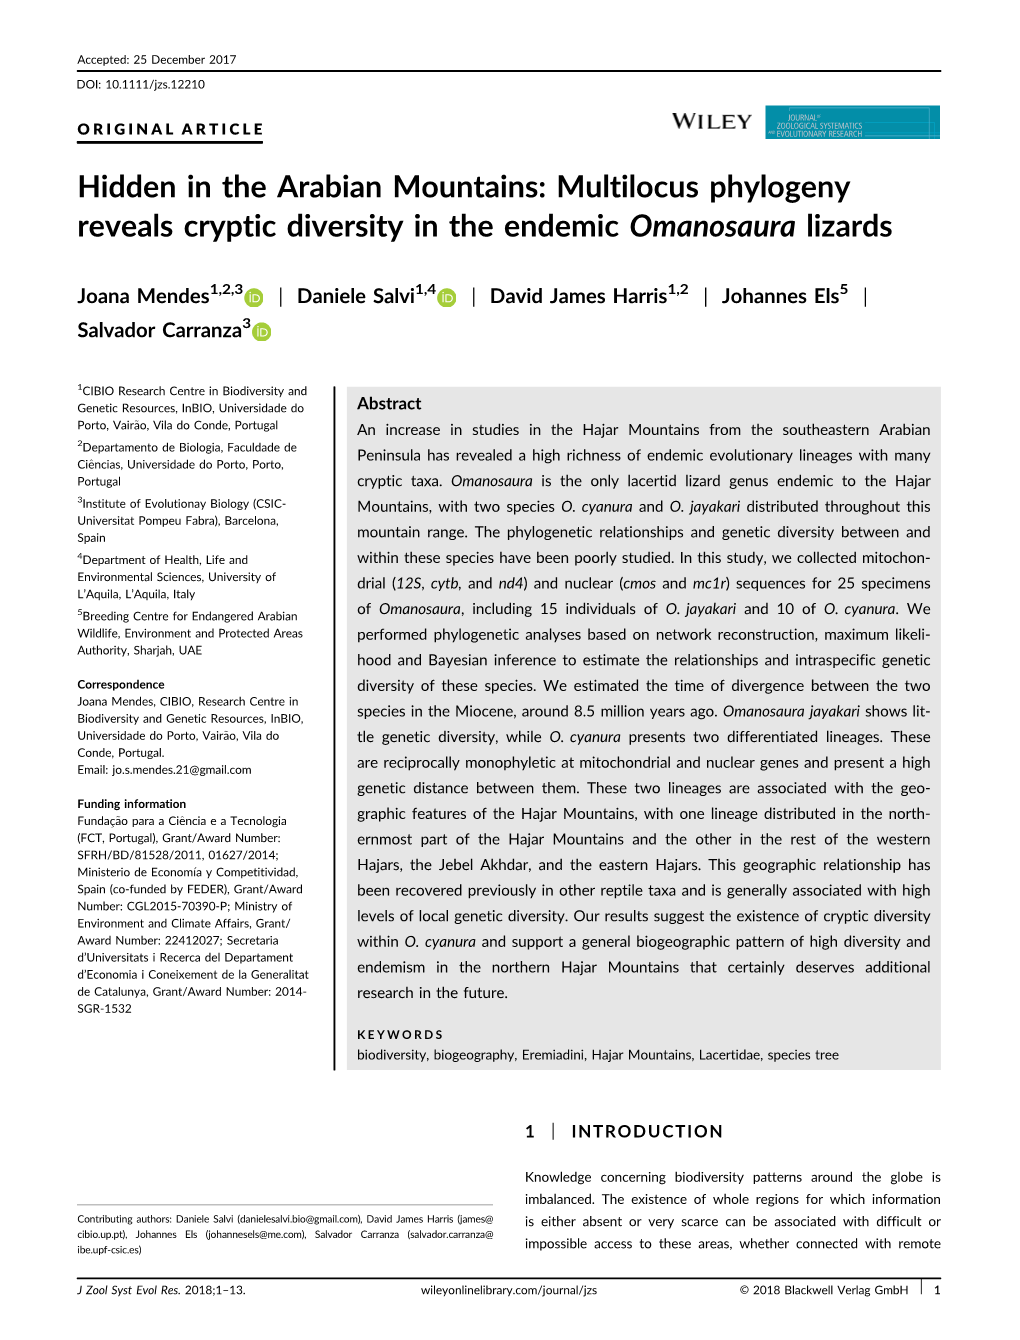 Hidden in the Arabian Mountains: Multilocus Phylogeny Reveals Cryptic Diversity in the Endemic Omanosaura Lizards